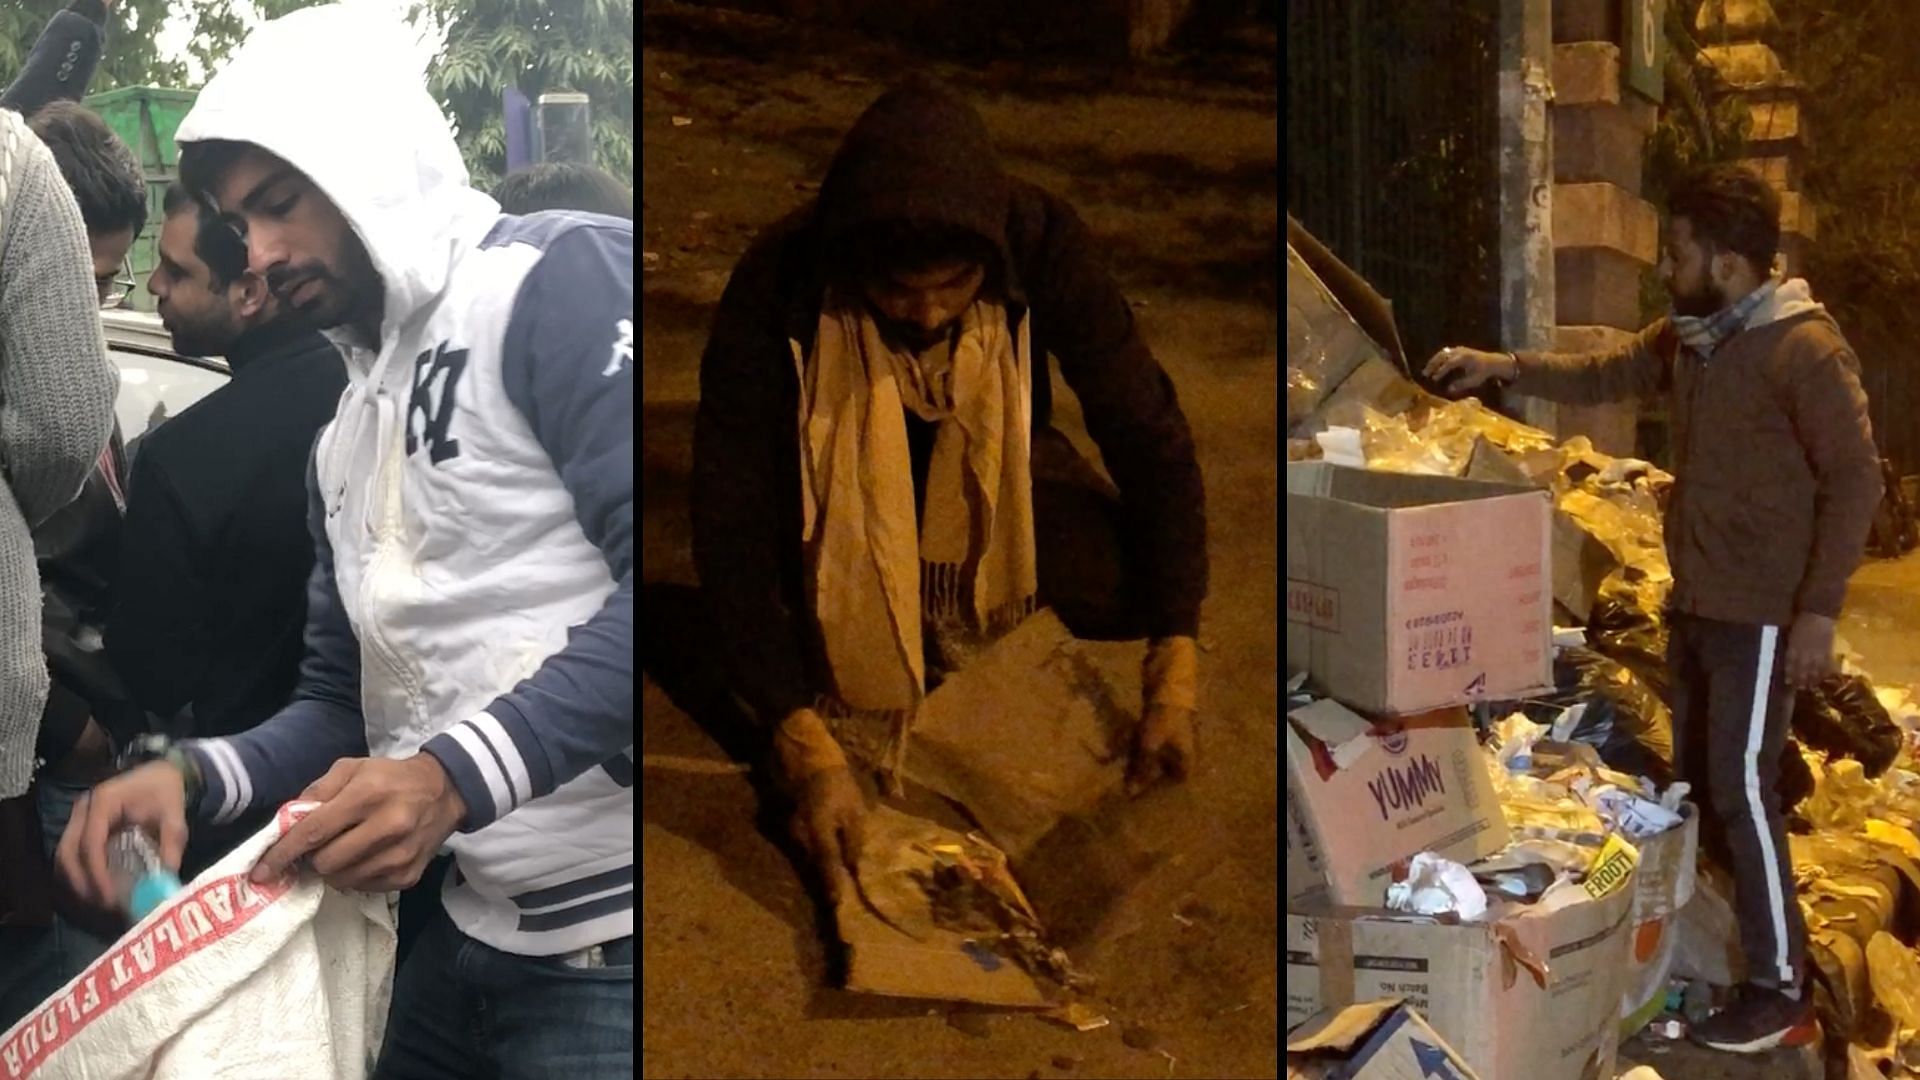 Students of Jamia Millia Islamia won the internet and hearts for cleaning up the streets after their protests ended for the day.